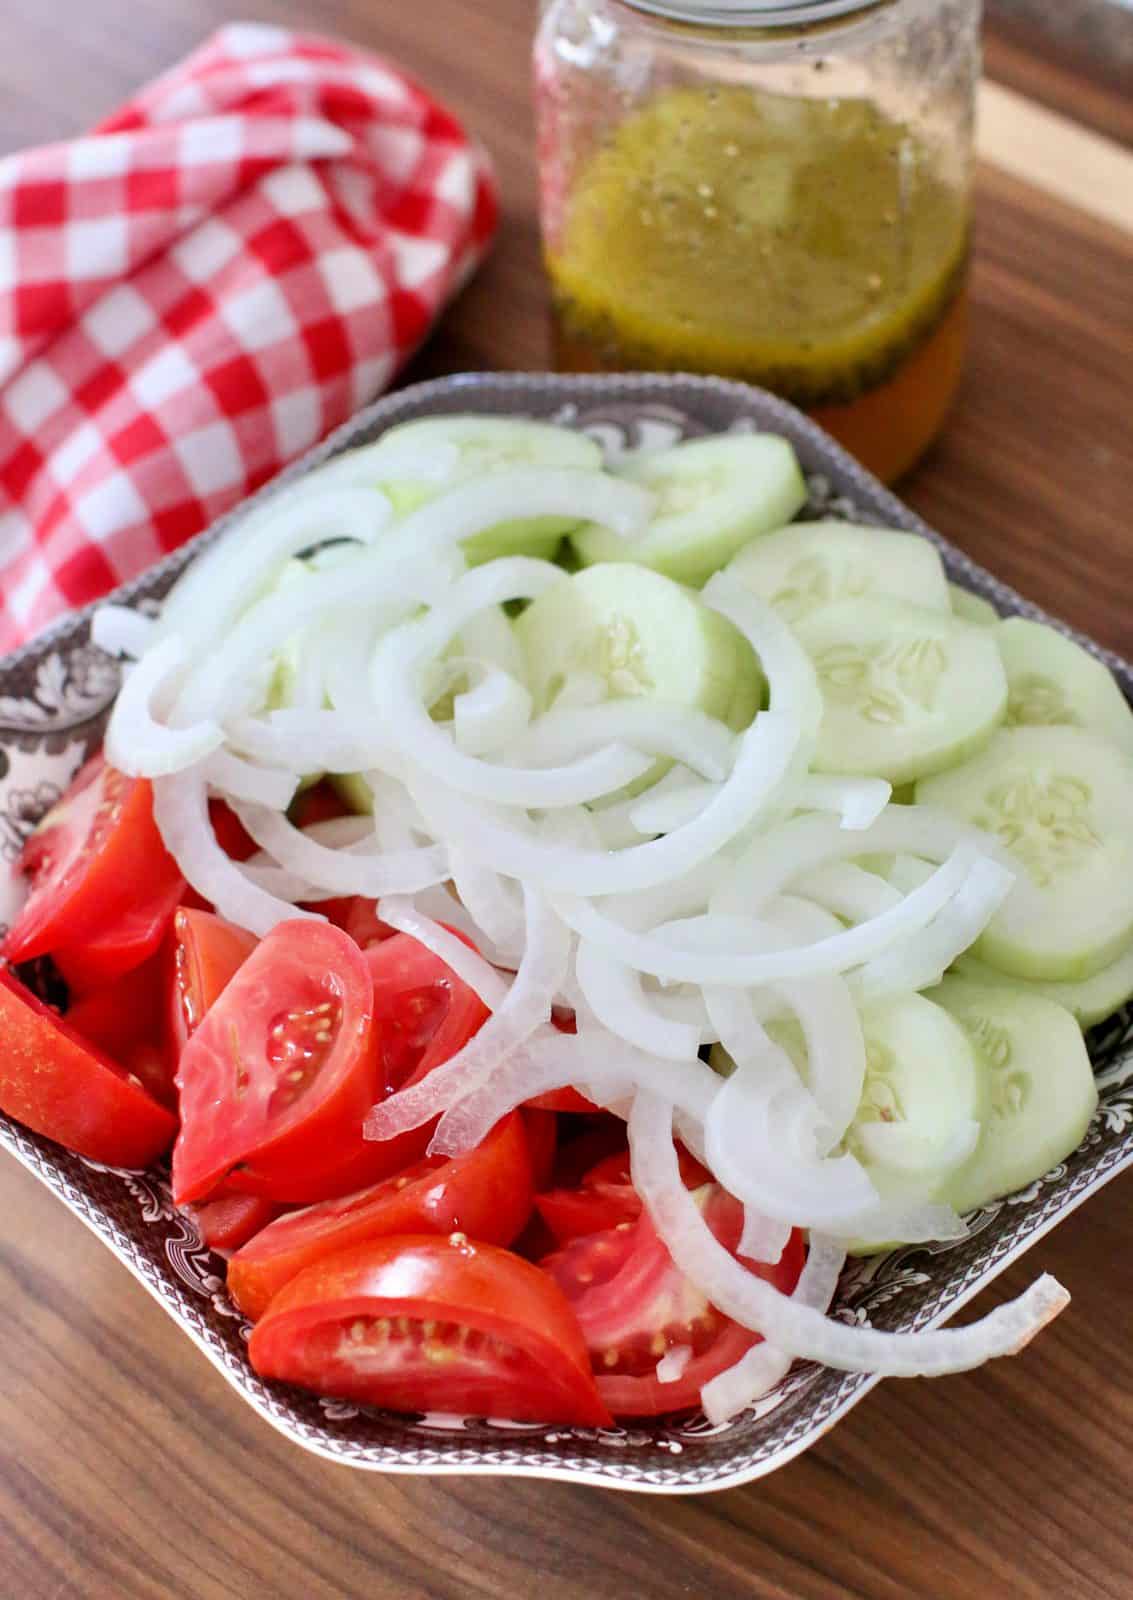 sliced tomatoes, onion and cucumbers in a bowl.